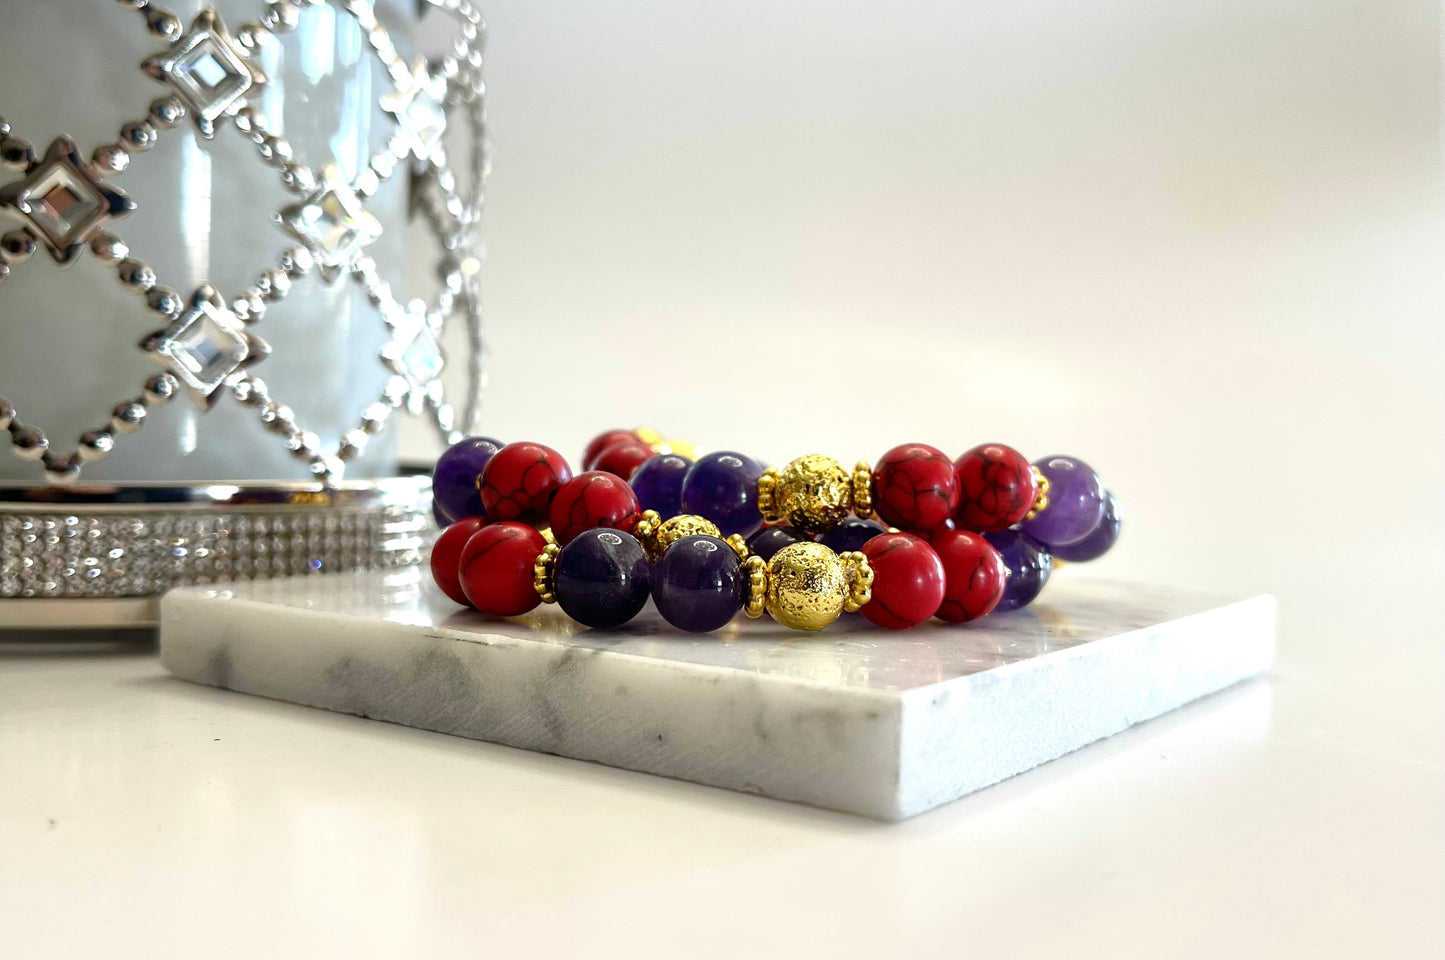 Amethyst and Red Turquoise Bracelet